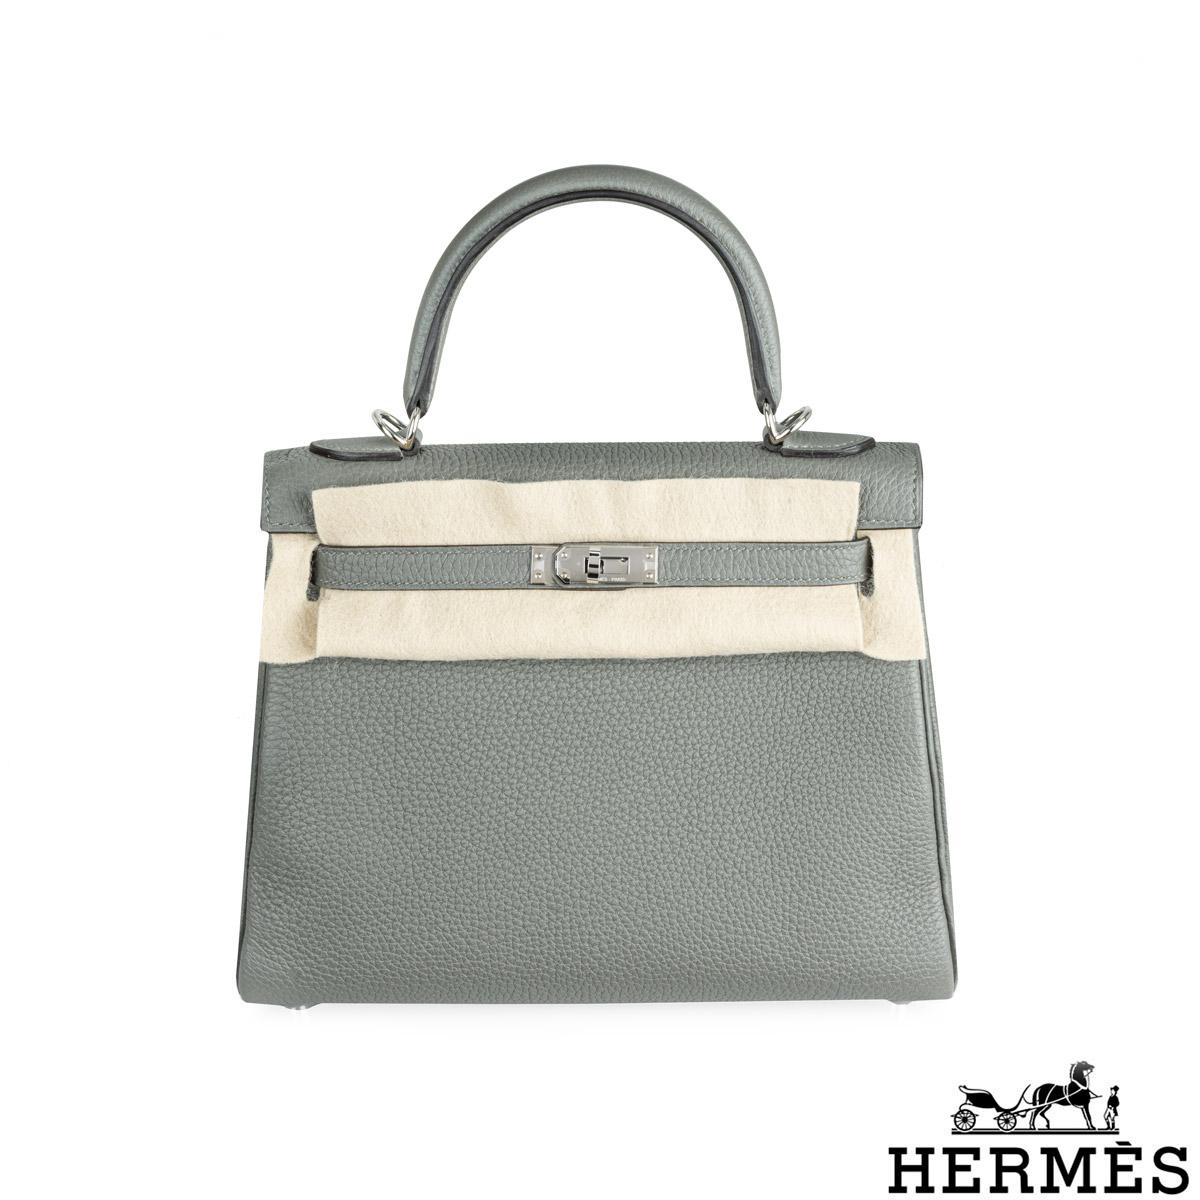 A classic Hermès 25cm Kelly bag. The exterior of this Kelly features a Retourne style in Gris Meyer Veau Togo leather. The Gris Meyer Togo leather is complemented with palladium hardware and tonal stitchings. It features a front toggle closure with